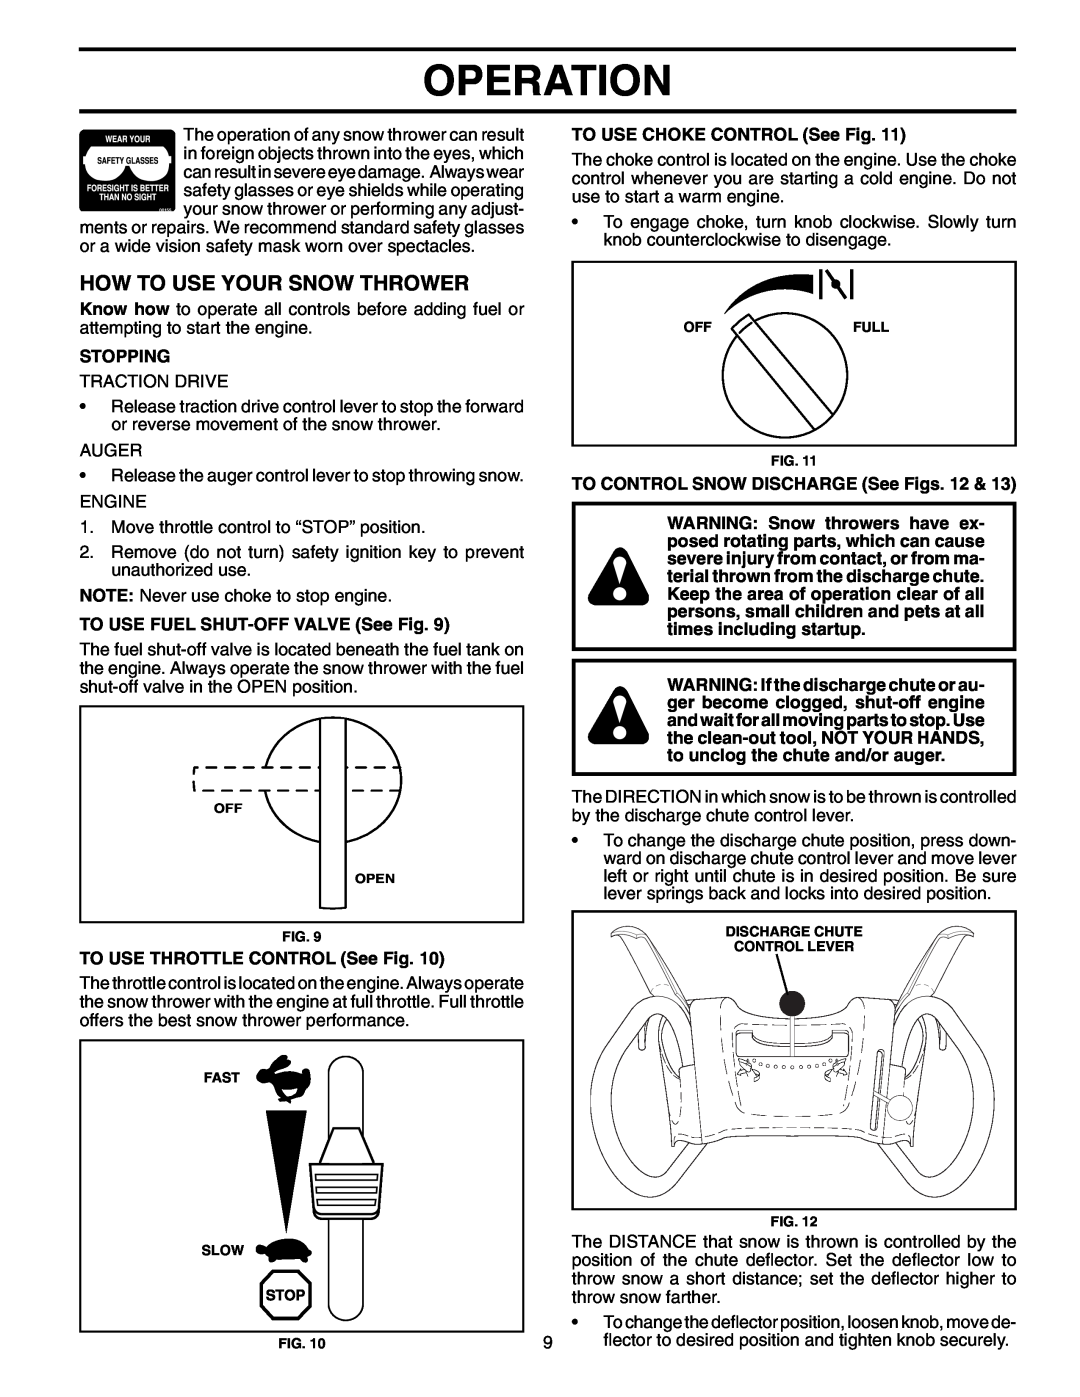 Poulan 199375 owner manual How To Use Your Snow Thrower, Operation, TO USE CHOKE CONTROL See Fig, Stopping 